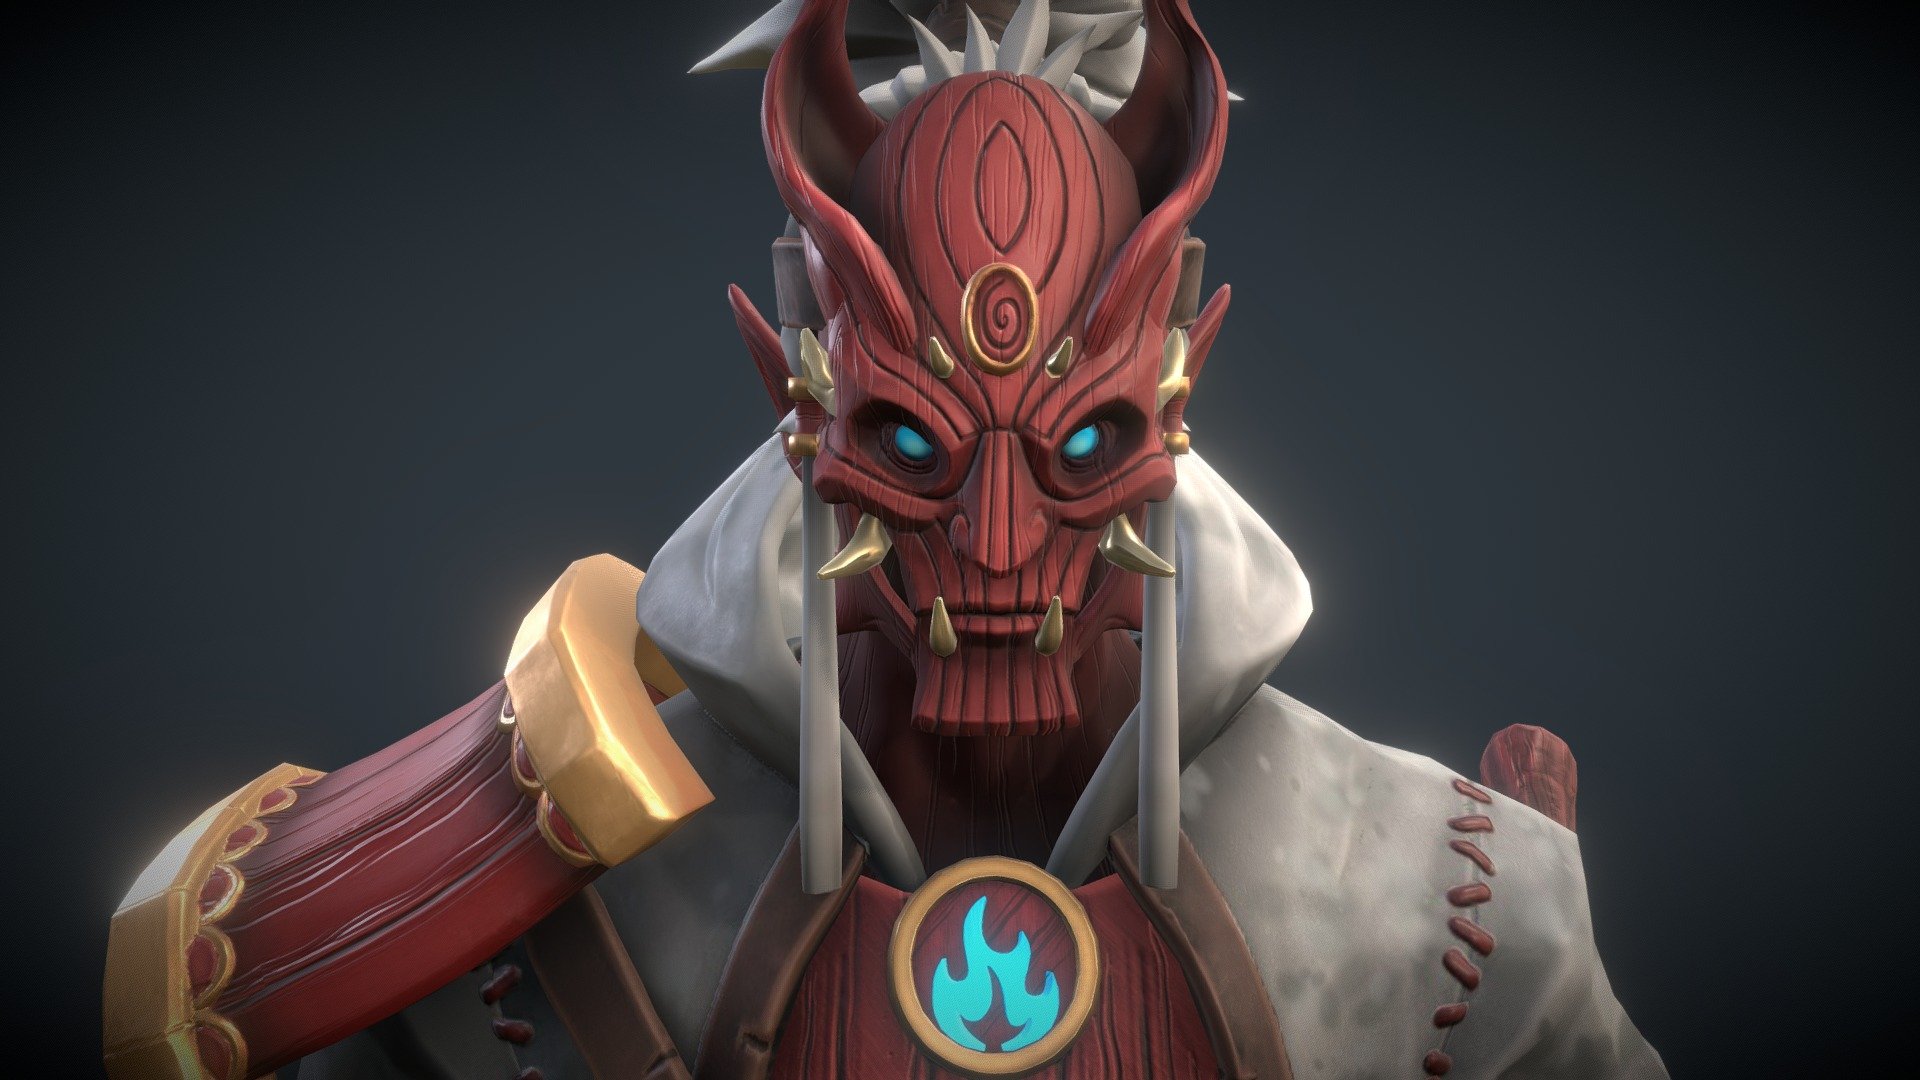 Based on a concept from Jason Nguyen, Fire mystic 3d model